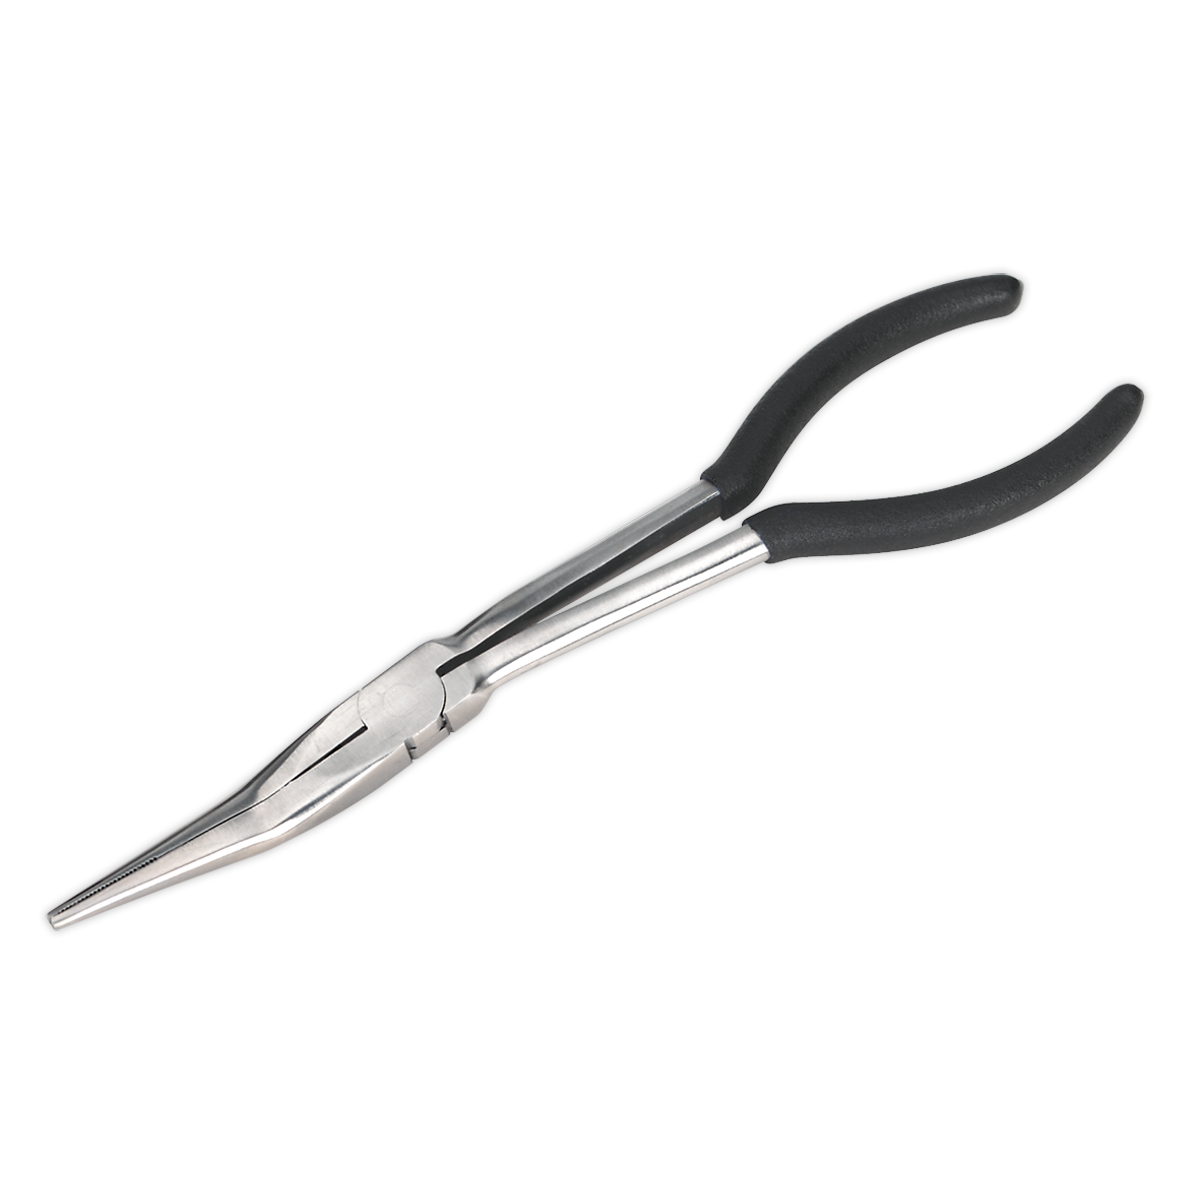 S0437 - Needle Nose Pliers 275mm Offset